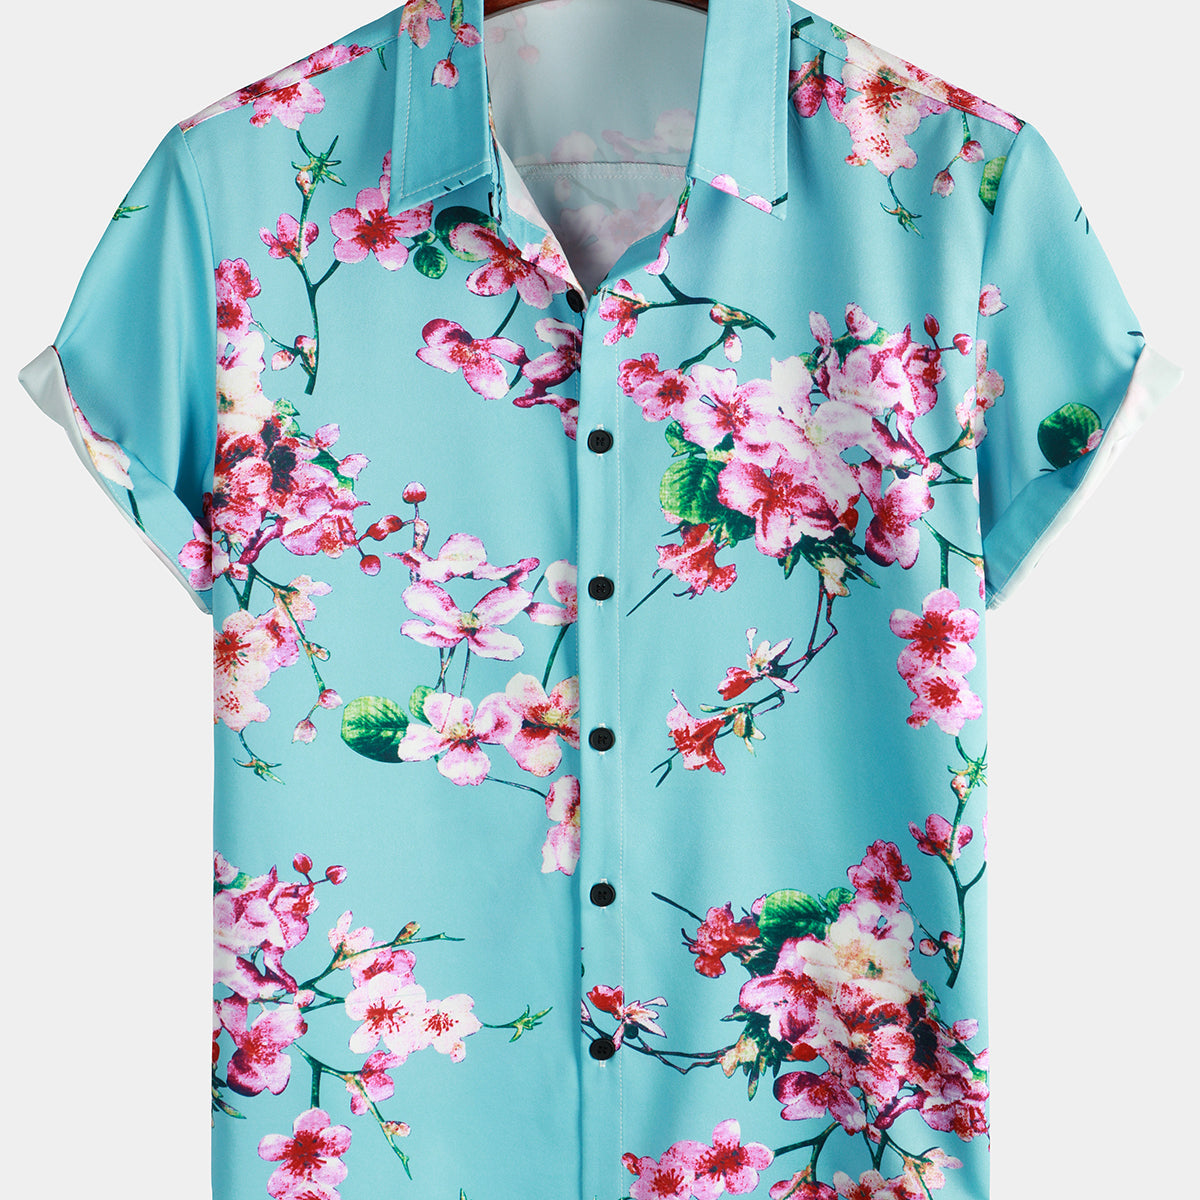 Men's Cherry Blossom Floral Print Holiday Casual Blue Short Sleeve Shirt